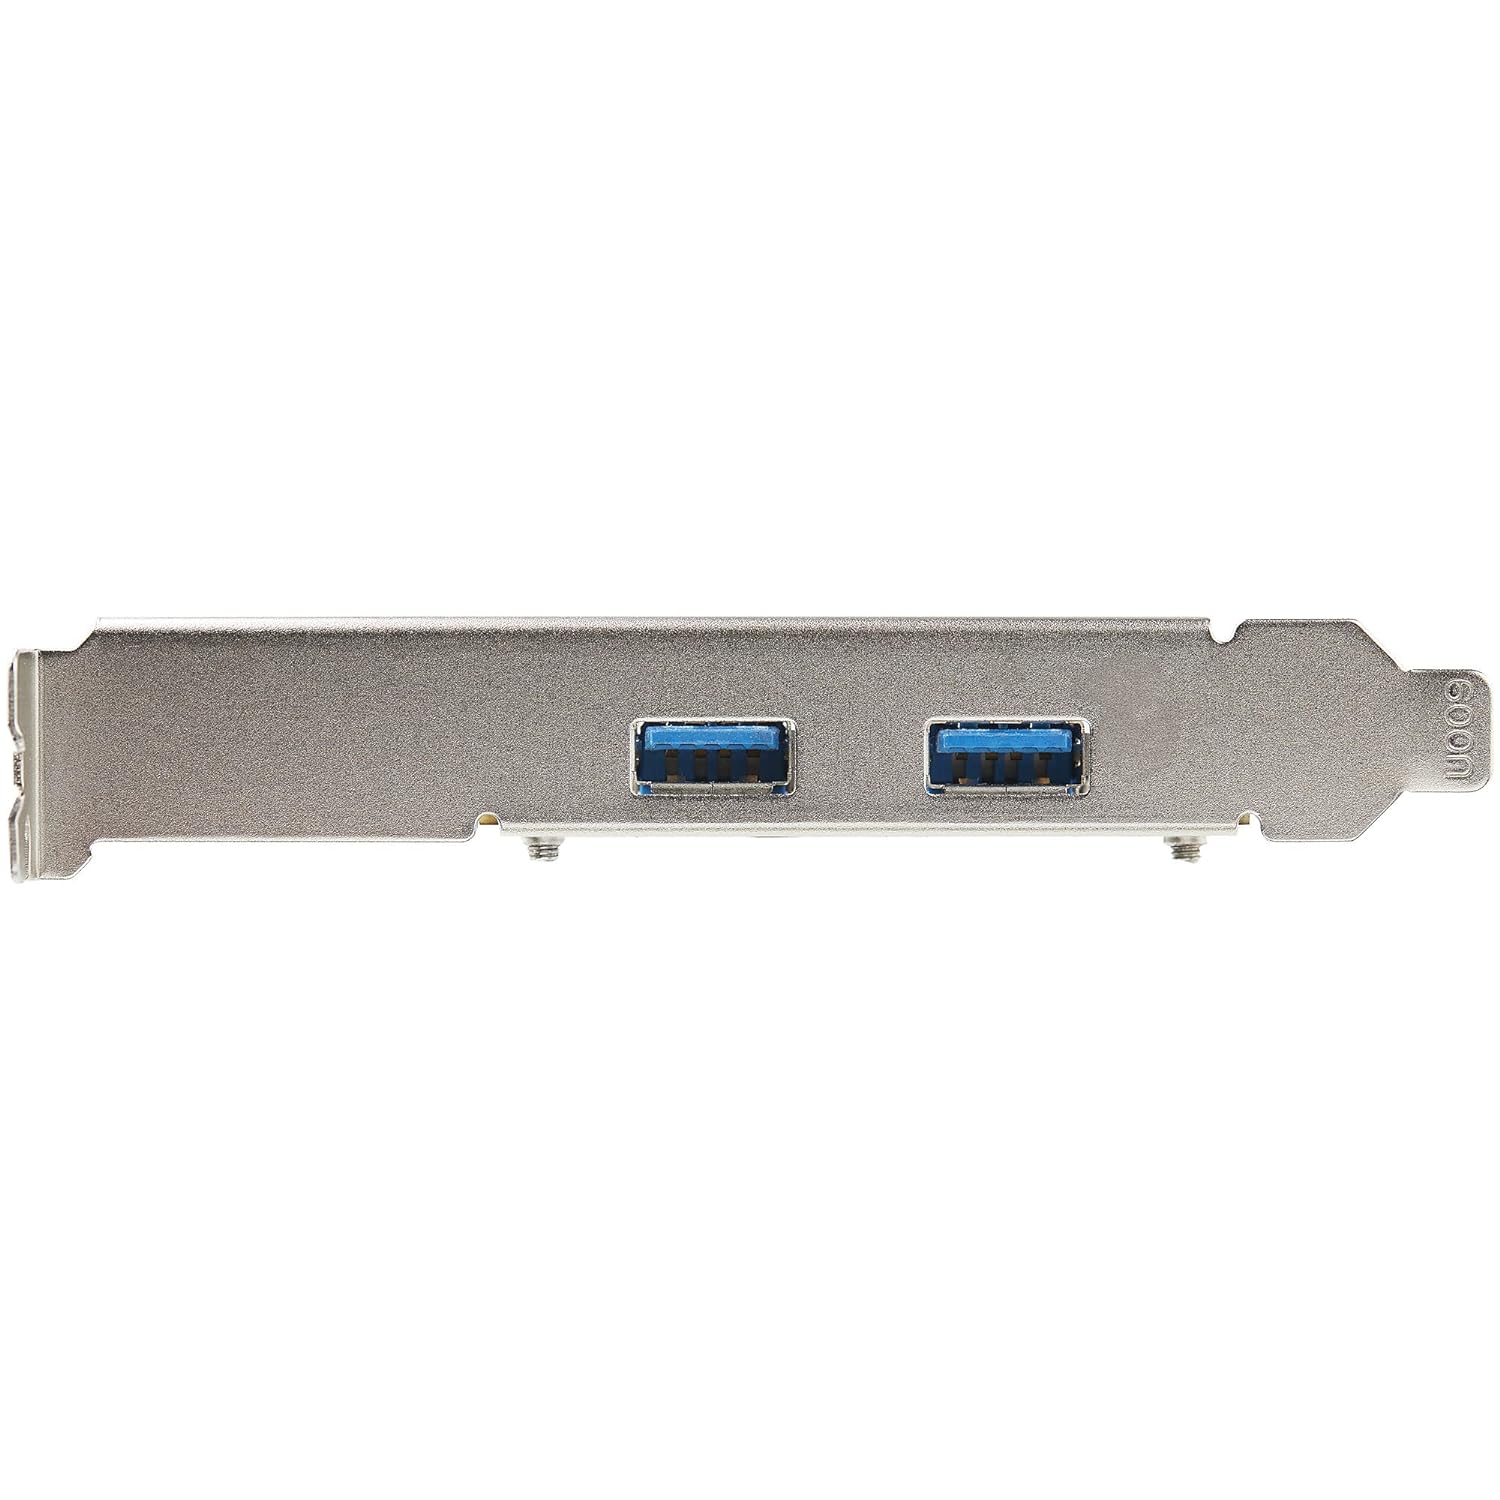 2-Port USB PCIe Card with 10Gbps/Port - USB 3.1/3.2 Gen 2 Type-A PCI Express 3.0 x2 Host Controller Expansion Card - Add-On Adapter Card - Full/Low Profile - Windows & Linux (PEXUSB312A3)